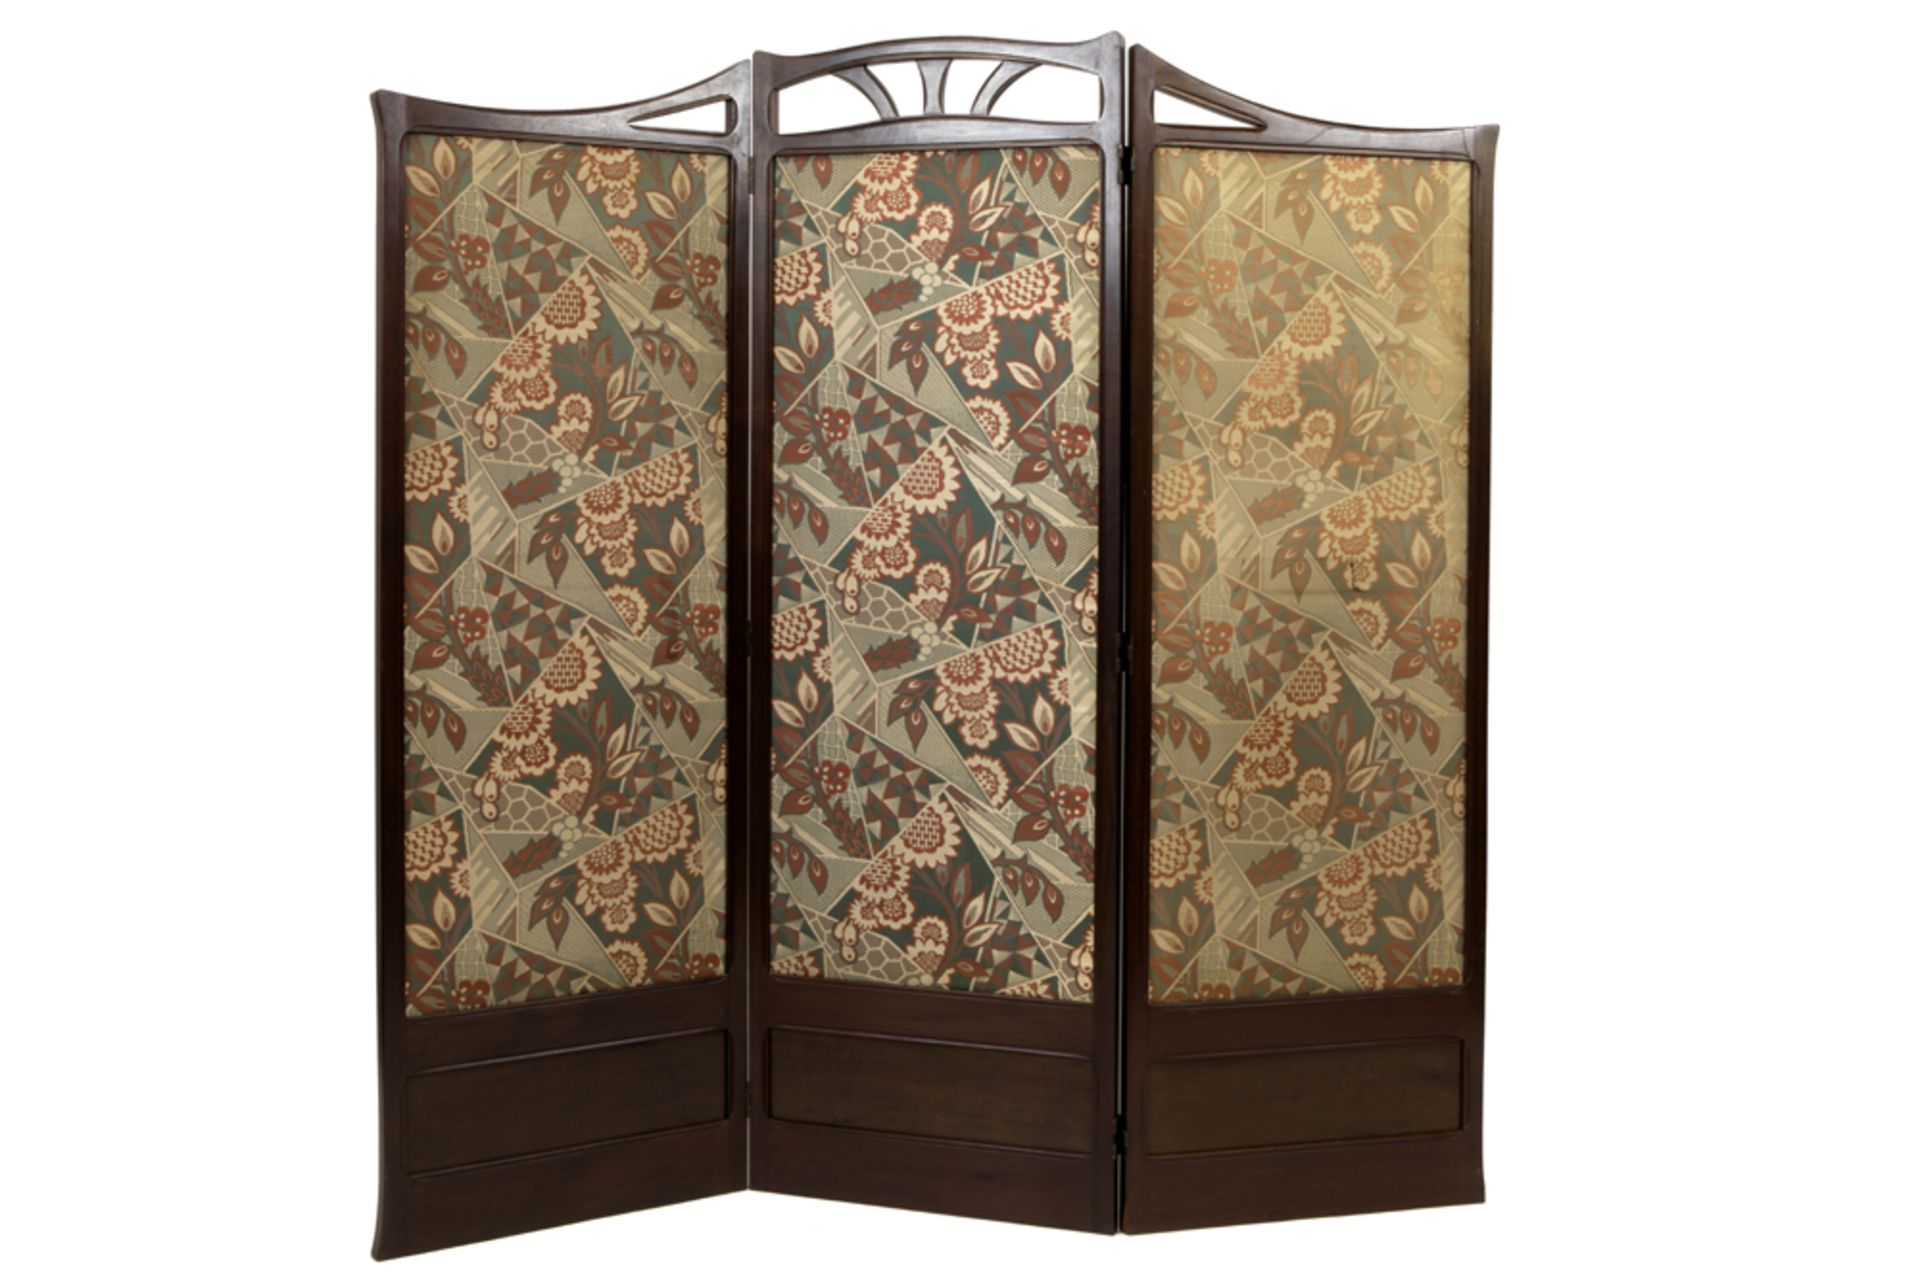 Art Nouveau screen in mahogany with three panels with typical whiplash ornamentation||Art Nouveau-